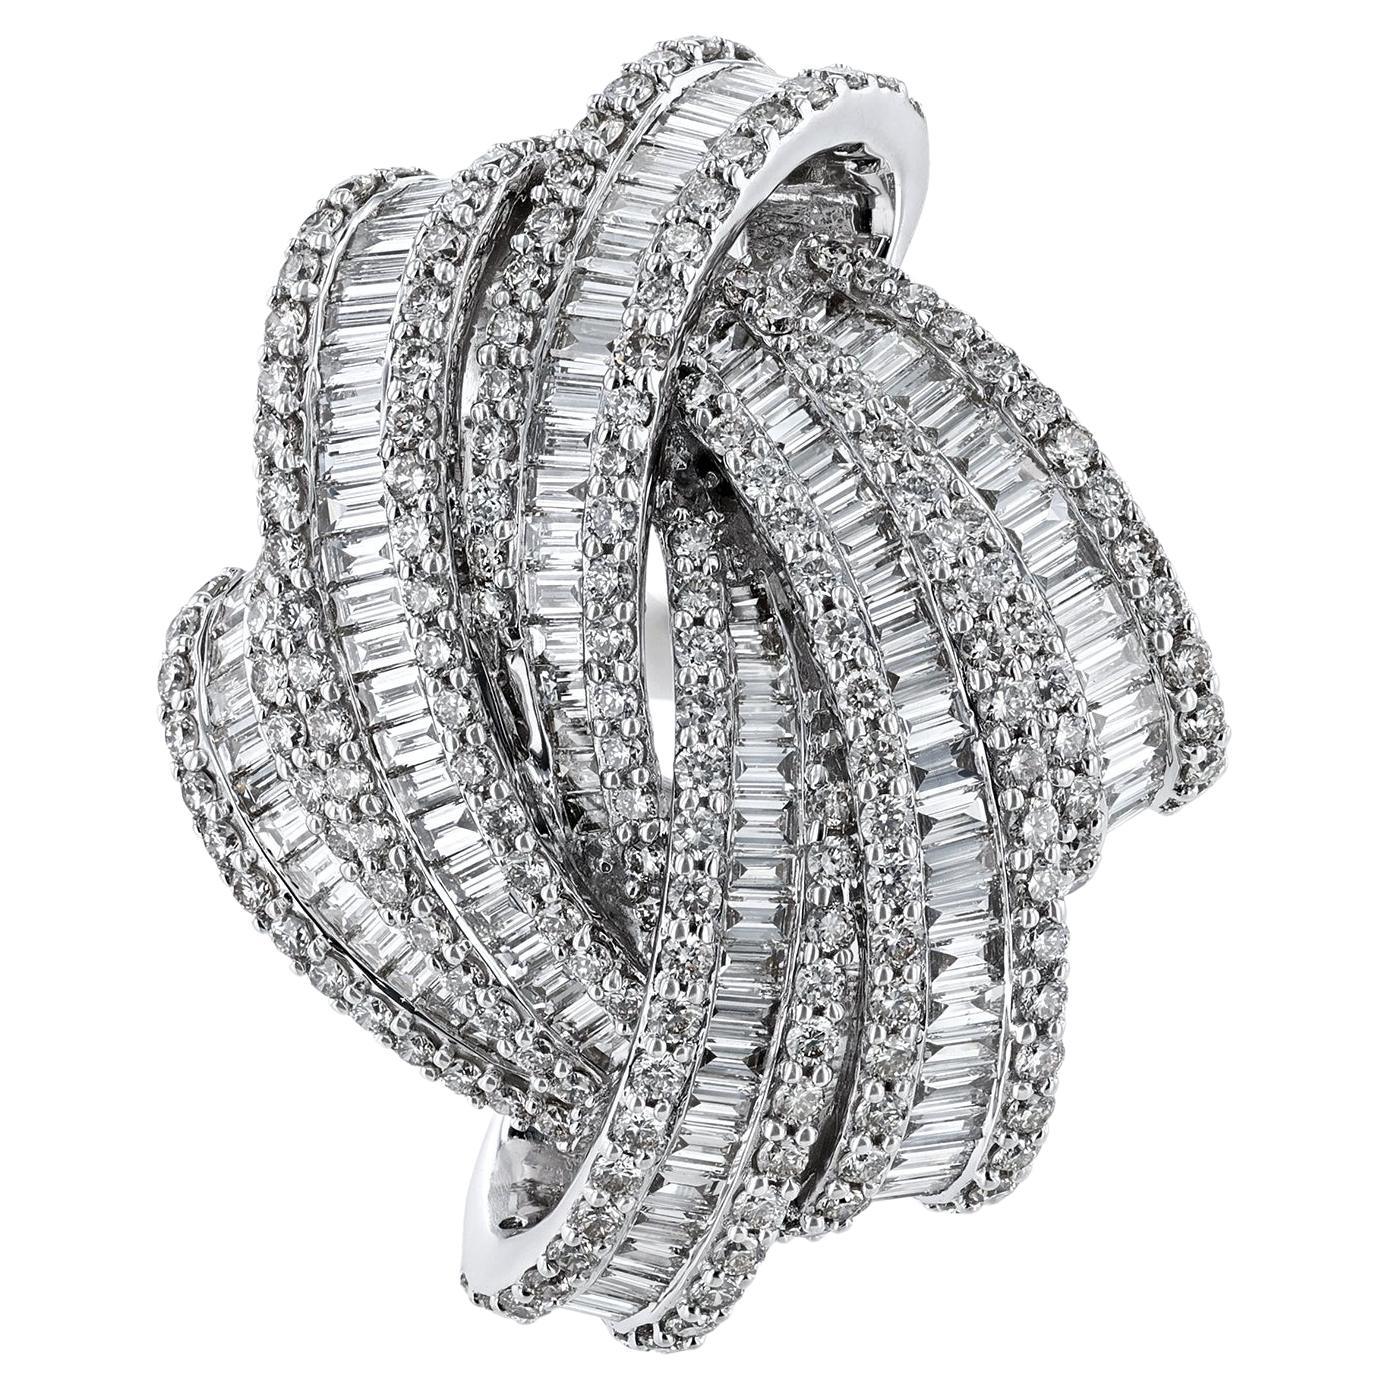 18K White Gold Loose Knot Round Baguette Diamond Ring, 3.63 Carats